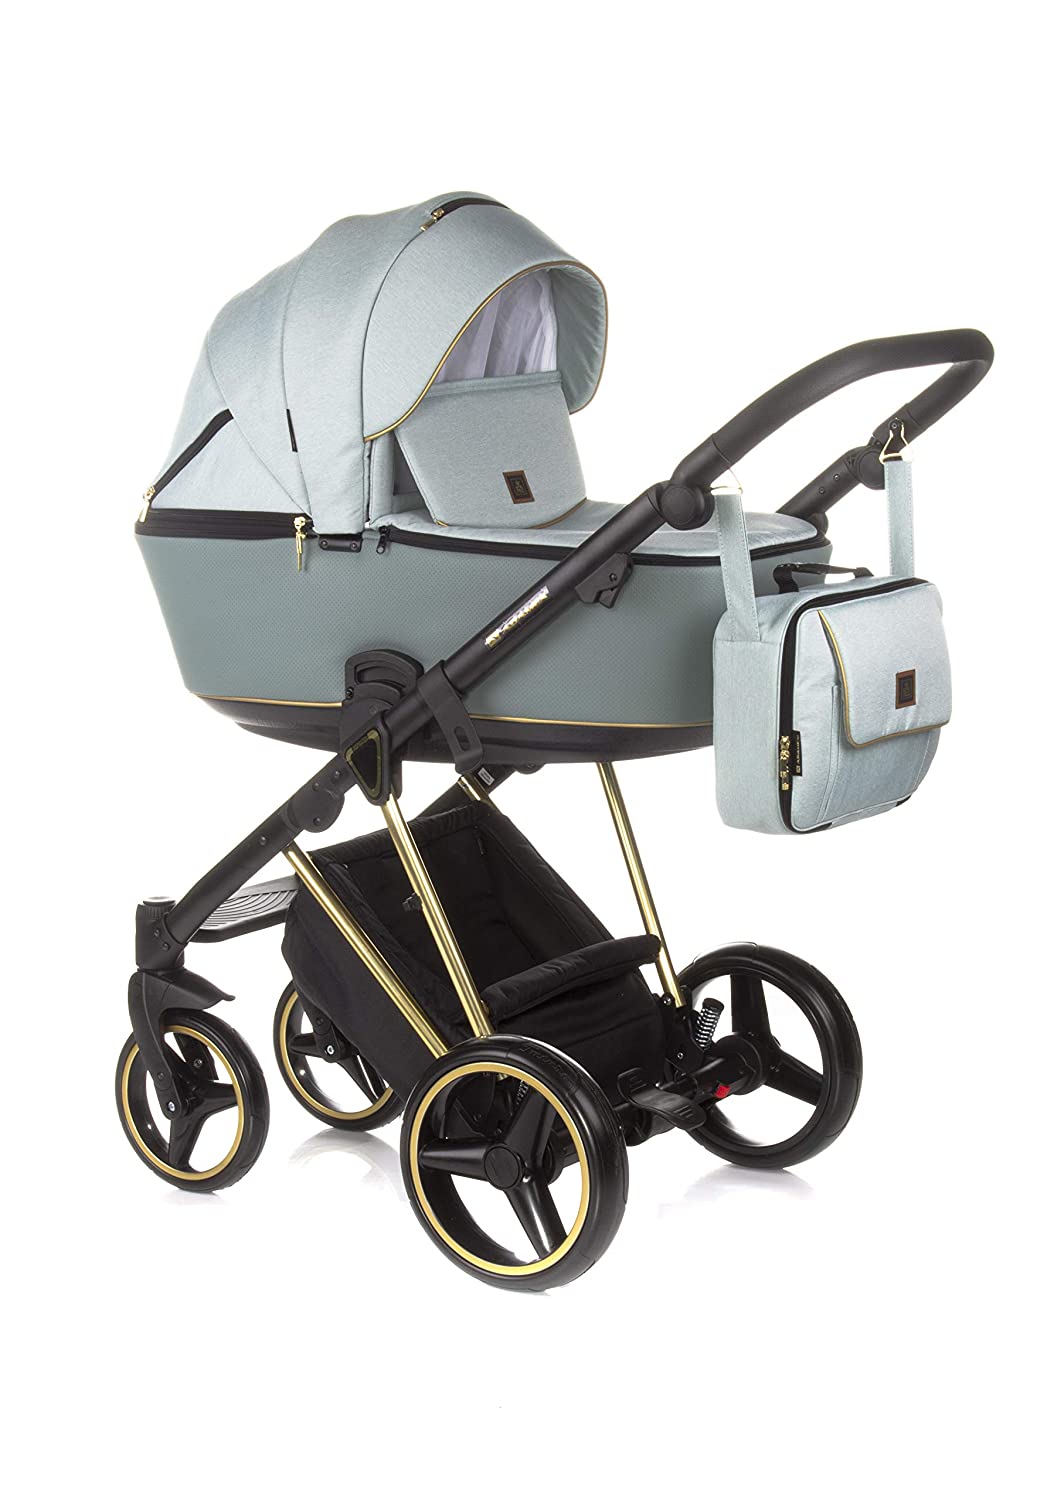 Adamex Cristiano Special Pushchair Combination Pram Complete Set + Wail Bag with Changing Mattress + Film + Mosquito Net + Cup Holder and Winter Muffs (CR-450 Turquoise Gold, 3-in-1)